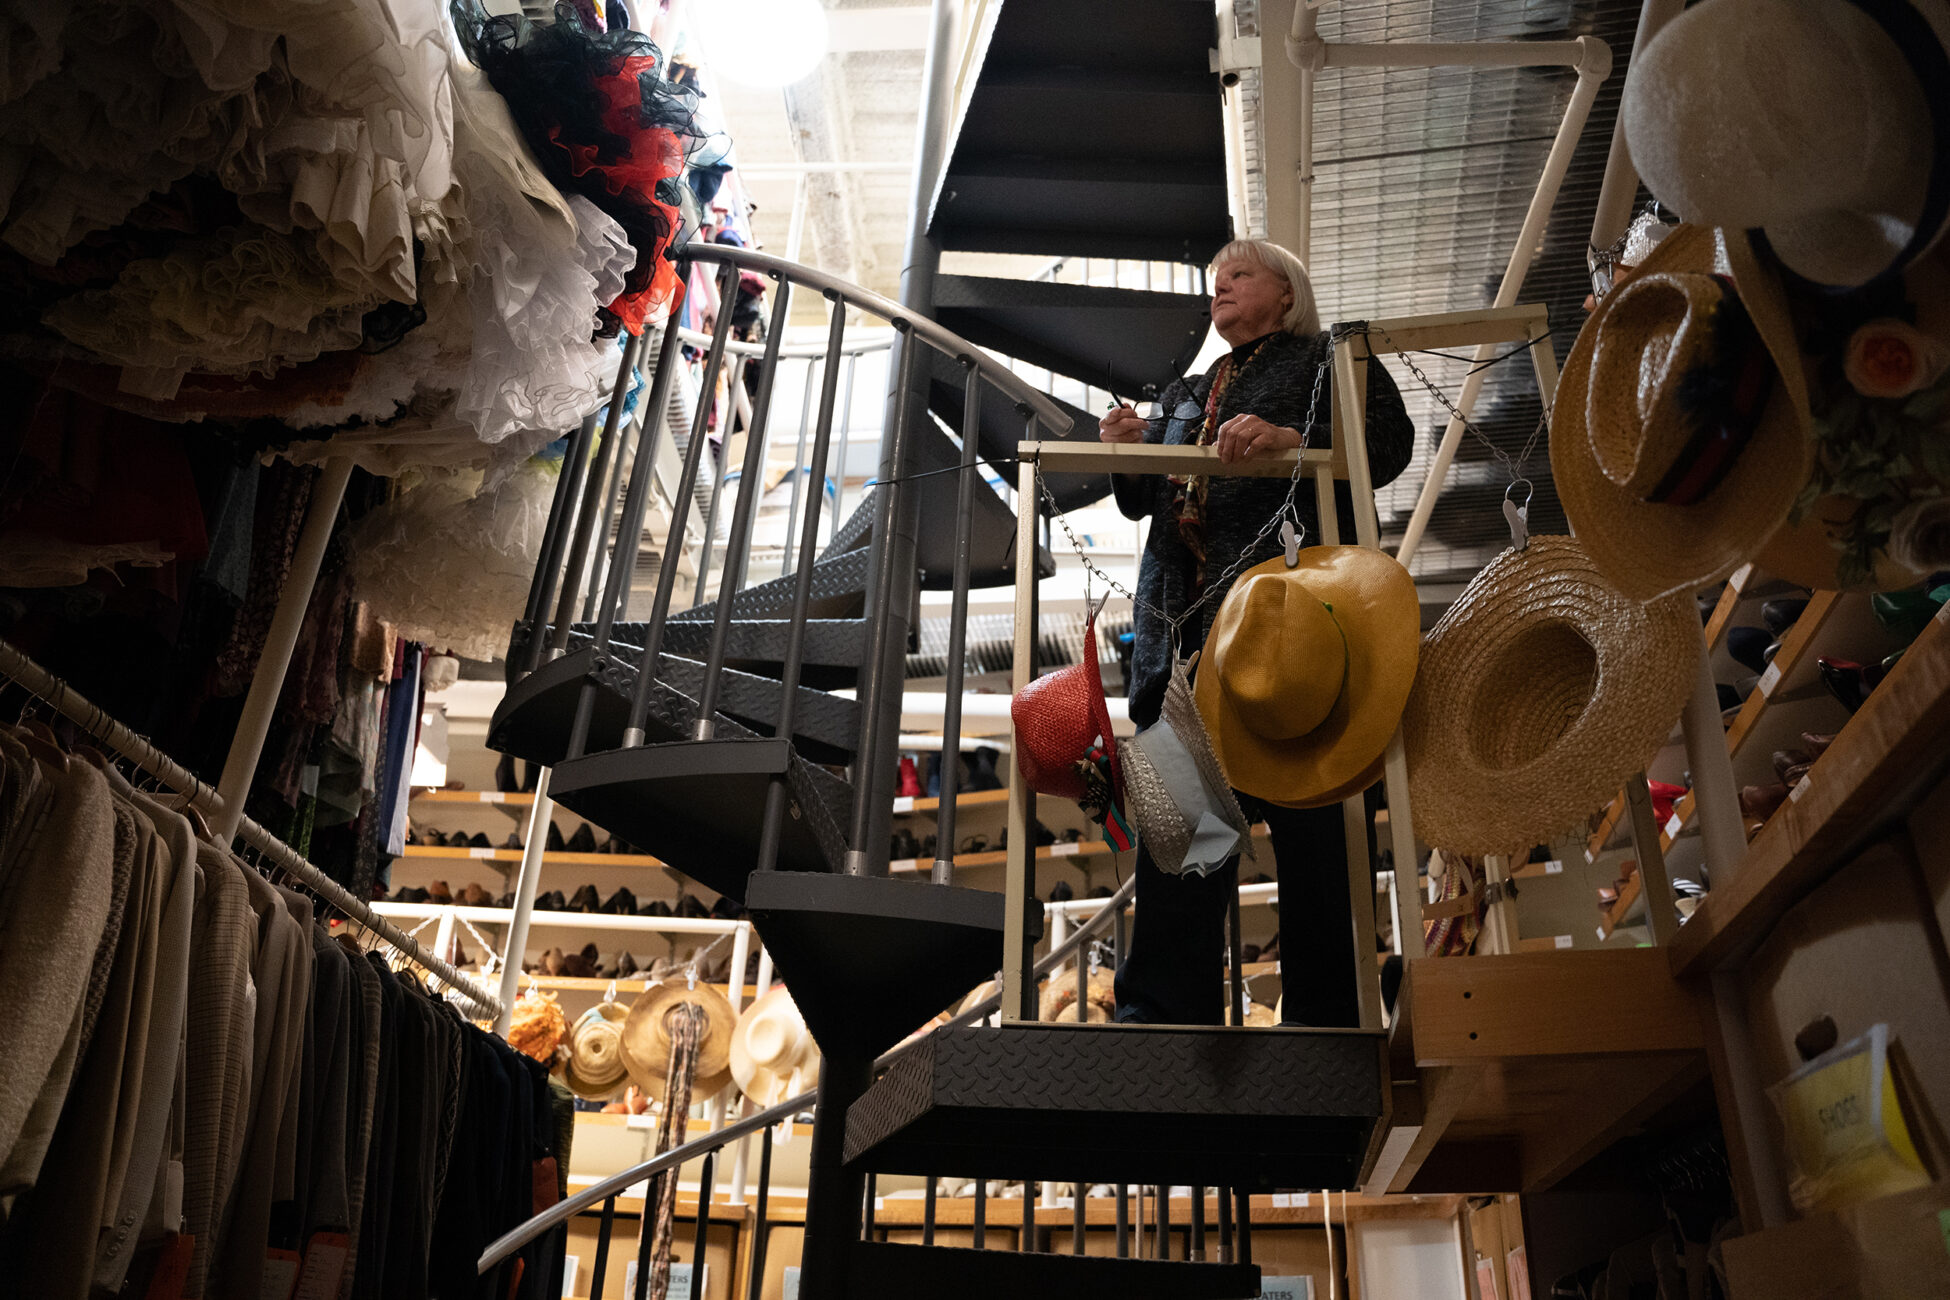 Bobbi Owen stands on a staircase surrounded by costumes.